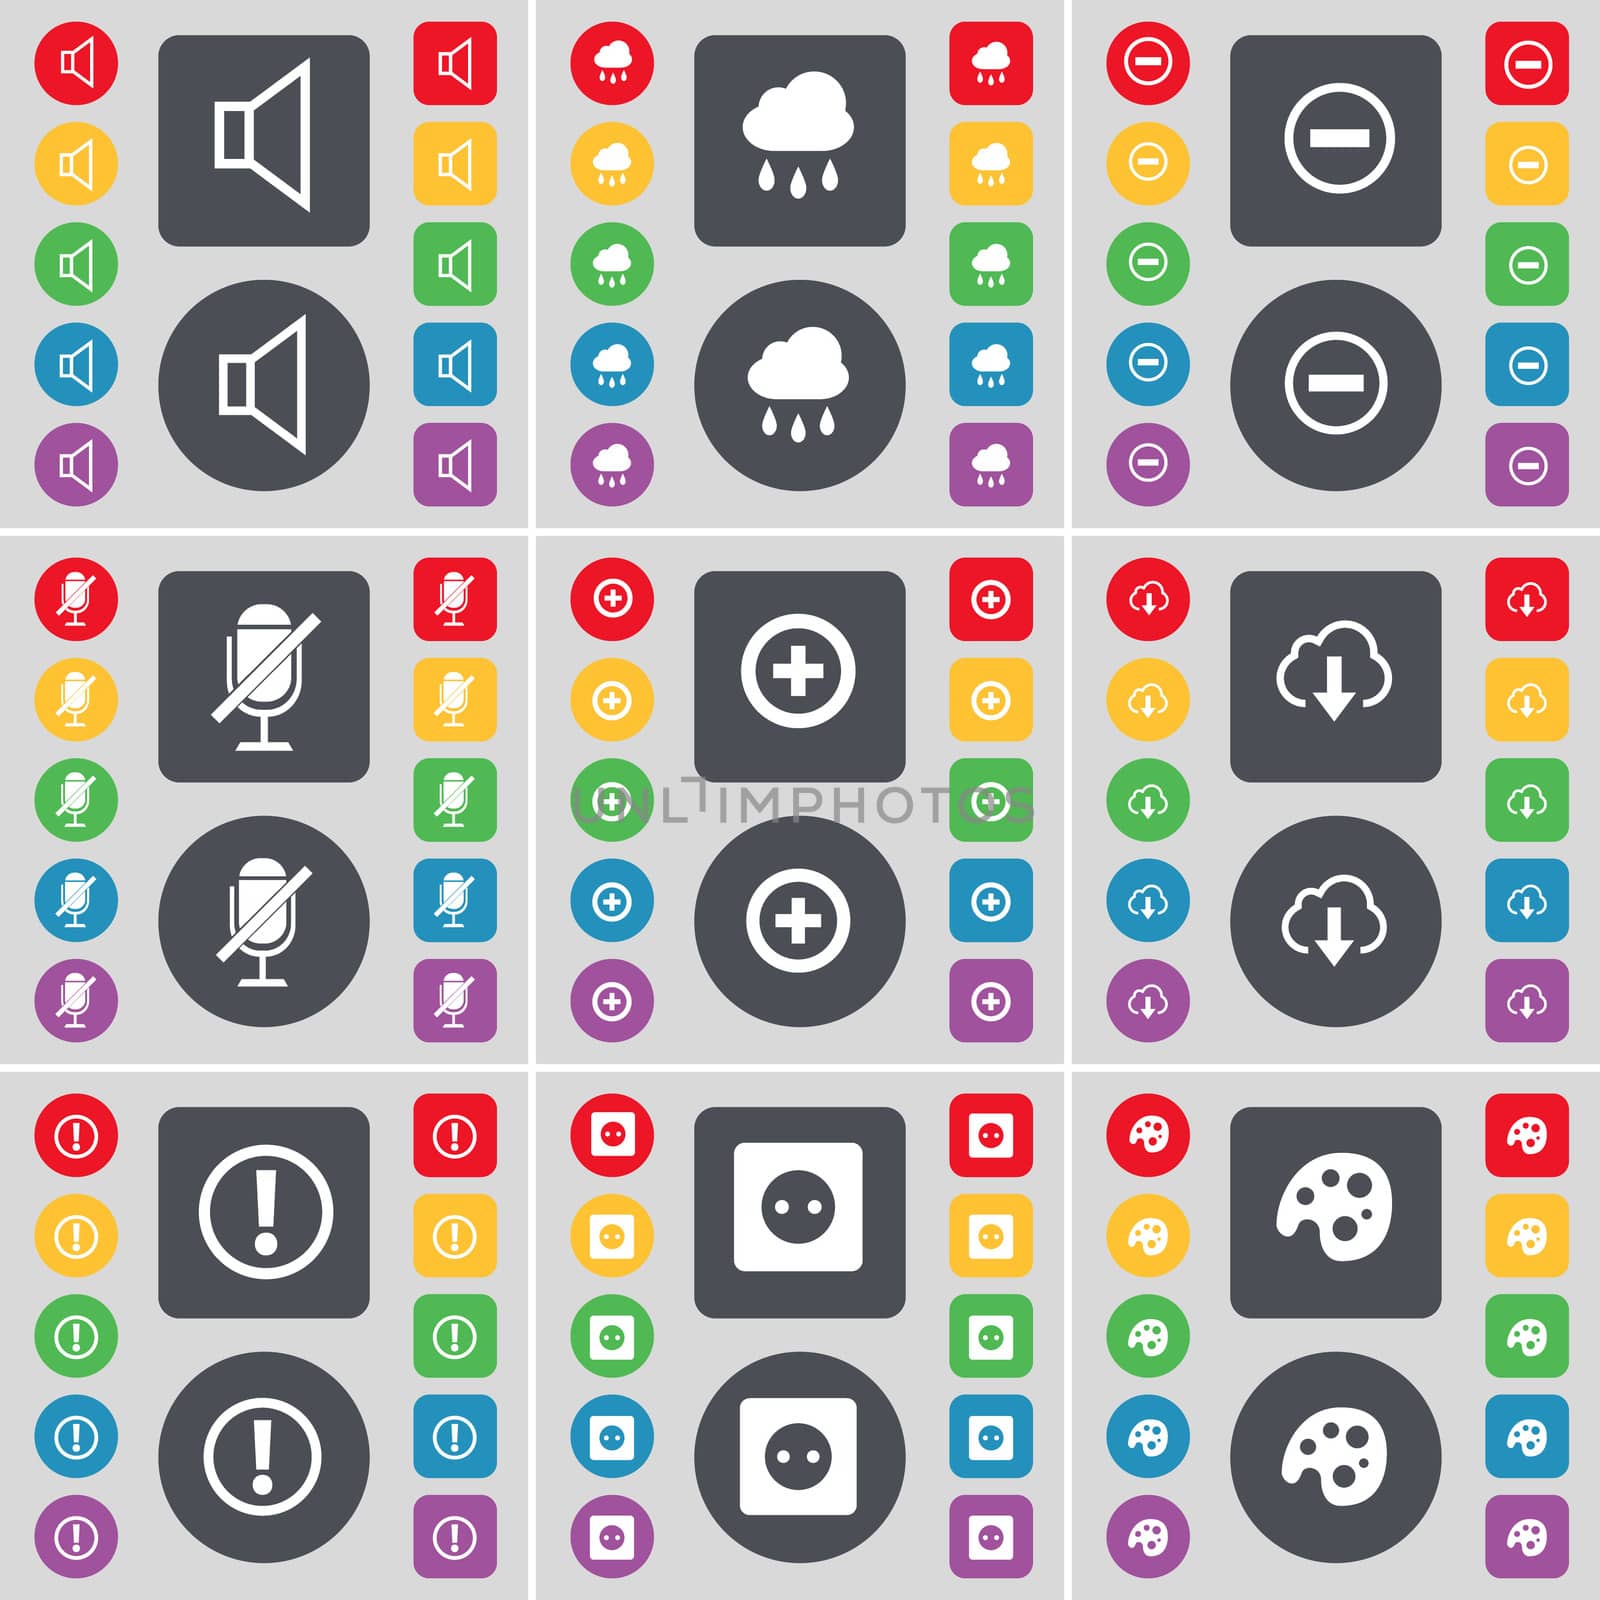 Sound, Cloud, Minus, Microphone, Plus, Cloud, Exclamation mark, Socket, Palette icon symbol. A large set of flat, colored buttons for your design. illustration